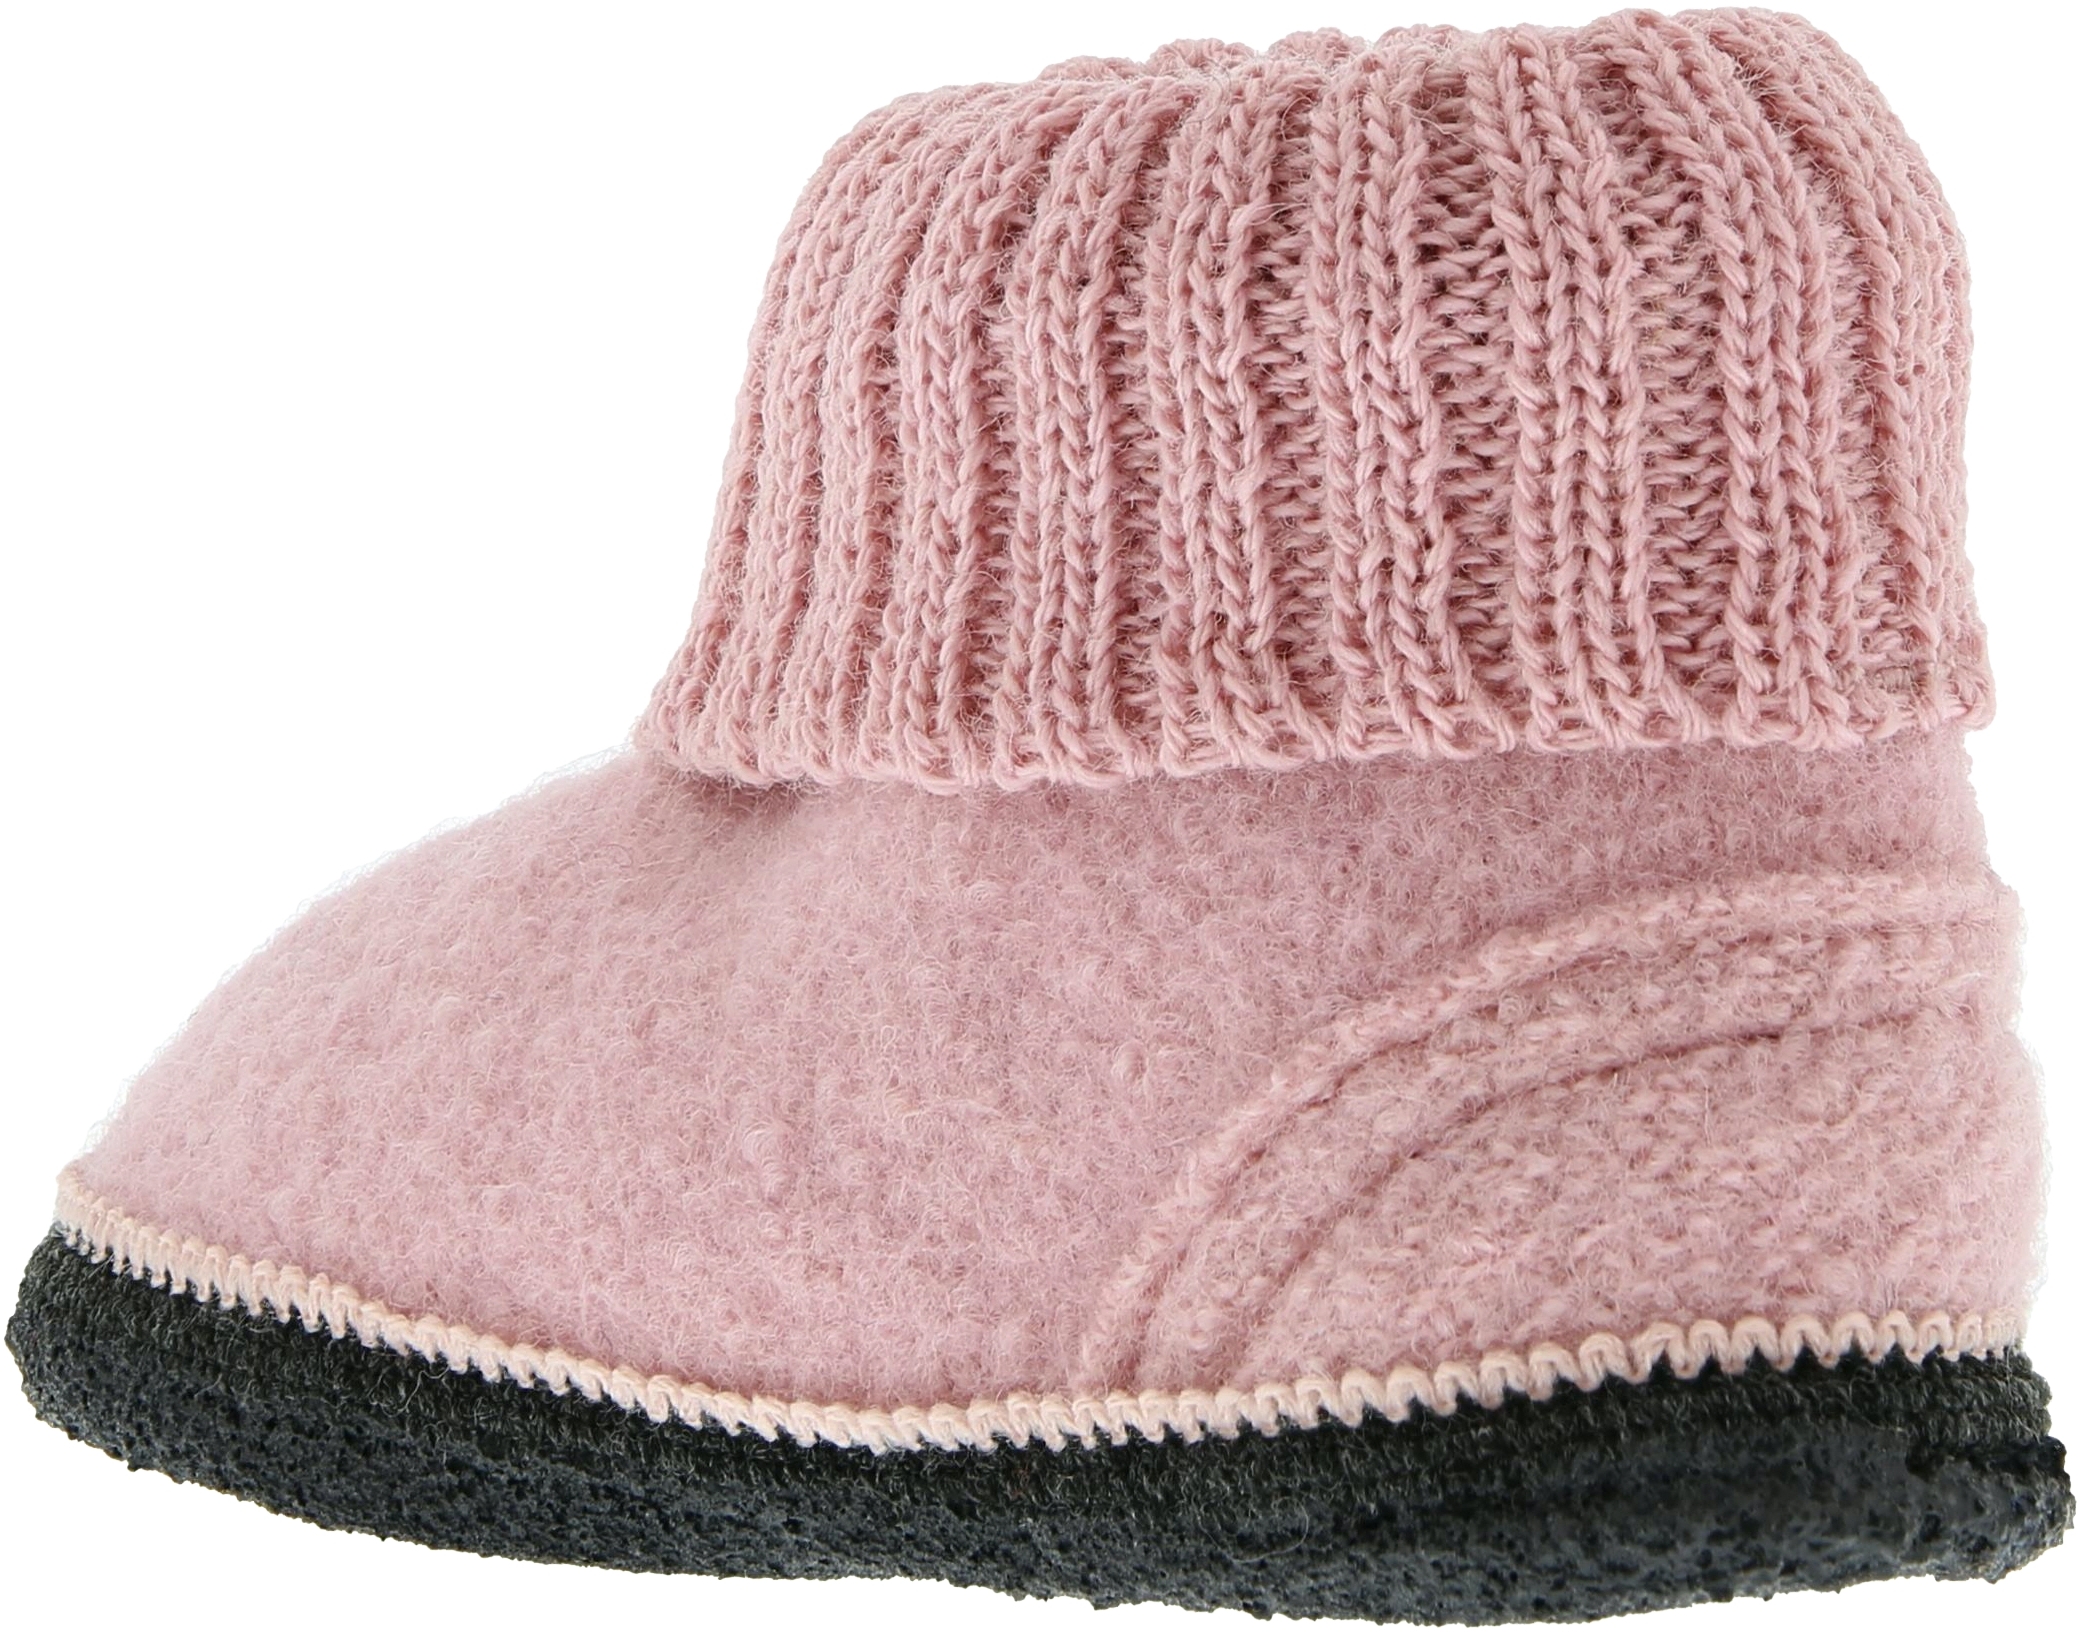 Bergstein Cozy Soft Pink Wolle